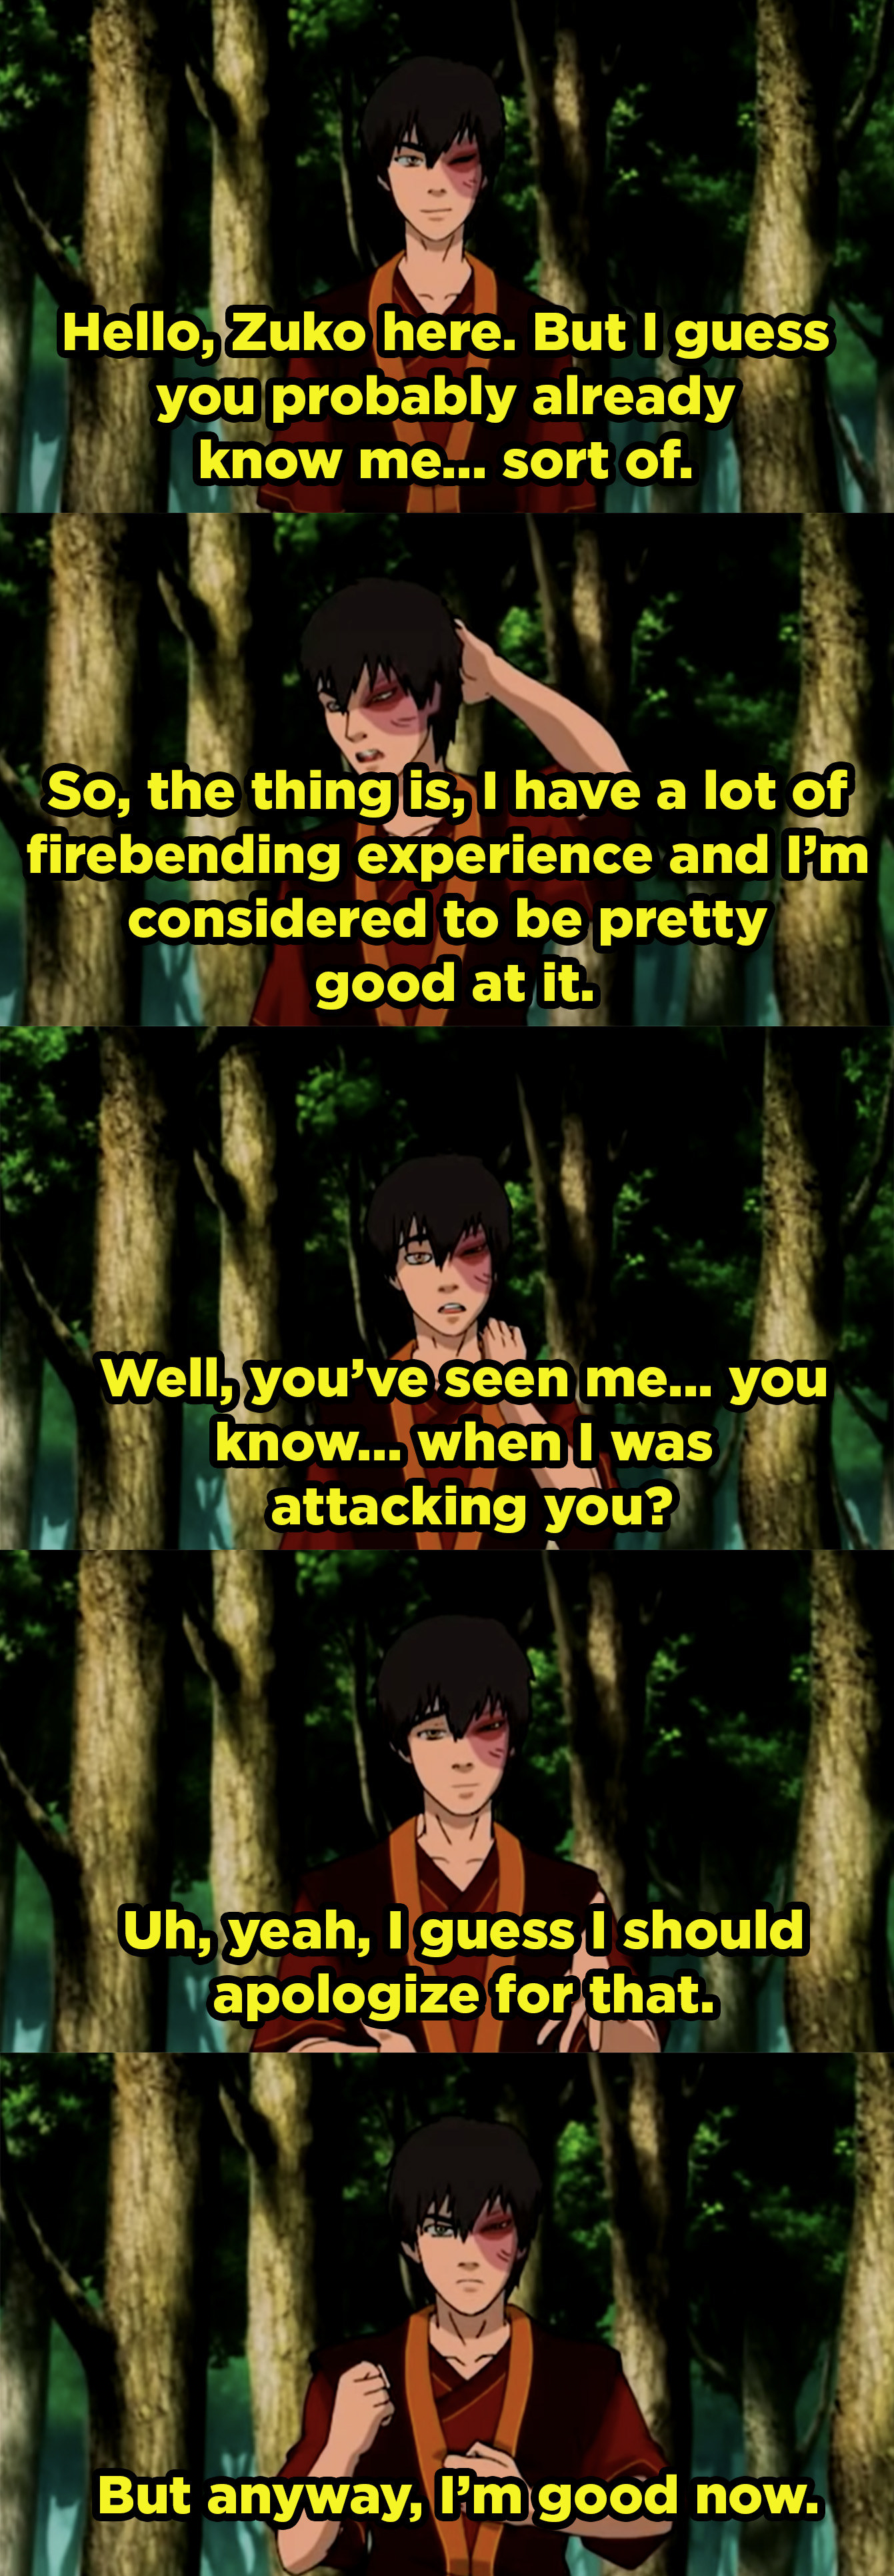 Zuko practicing his apology and saying that he&#x27;s good now. 